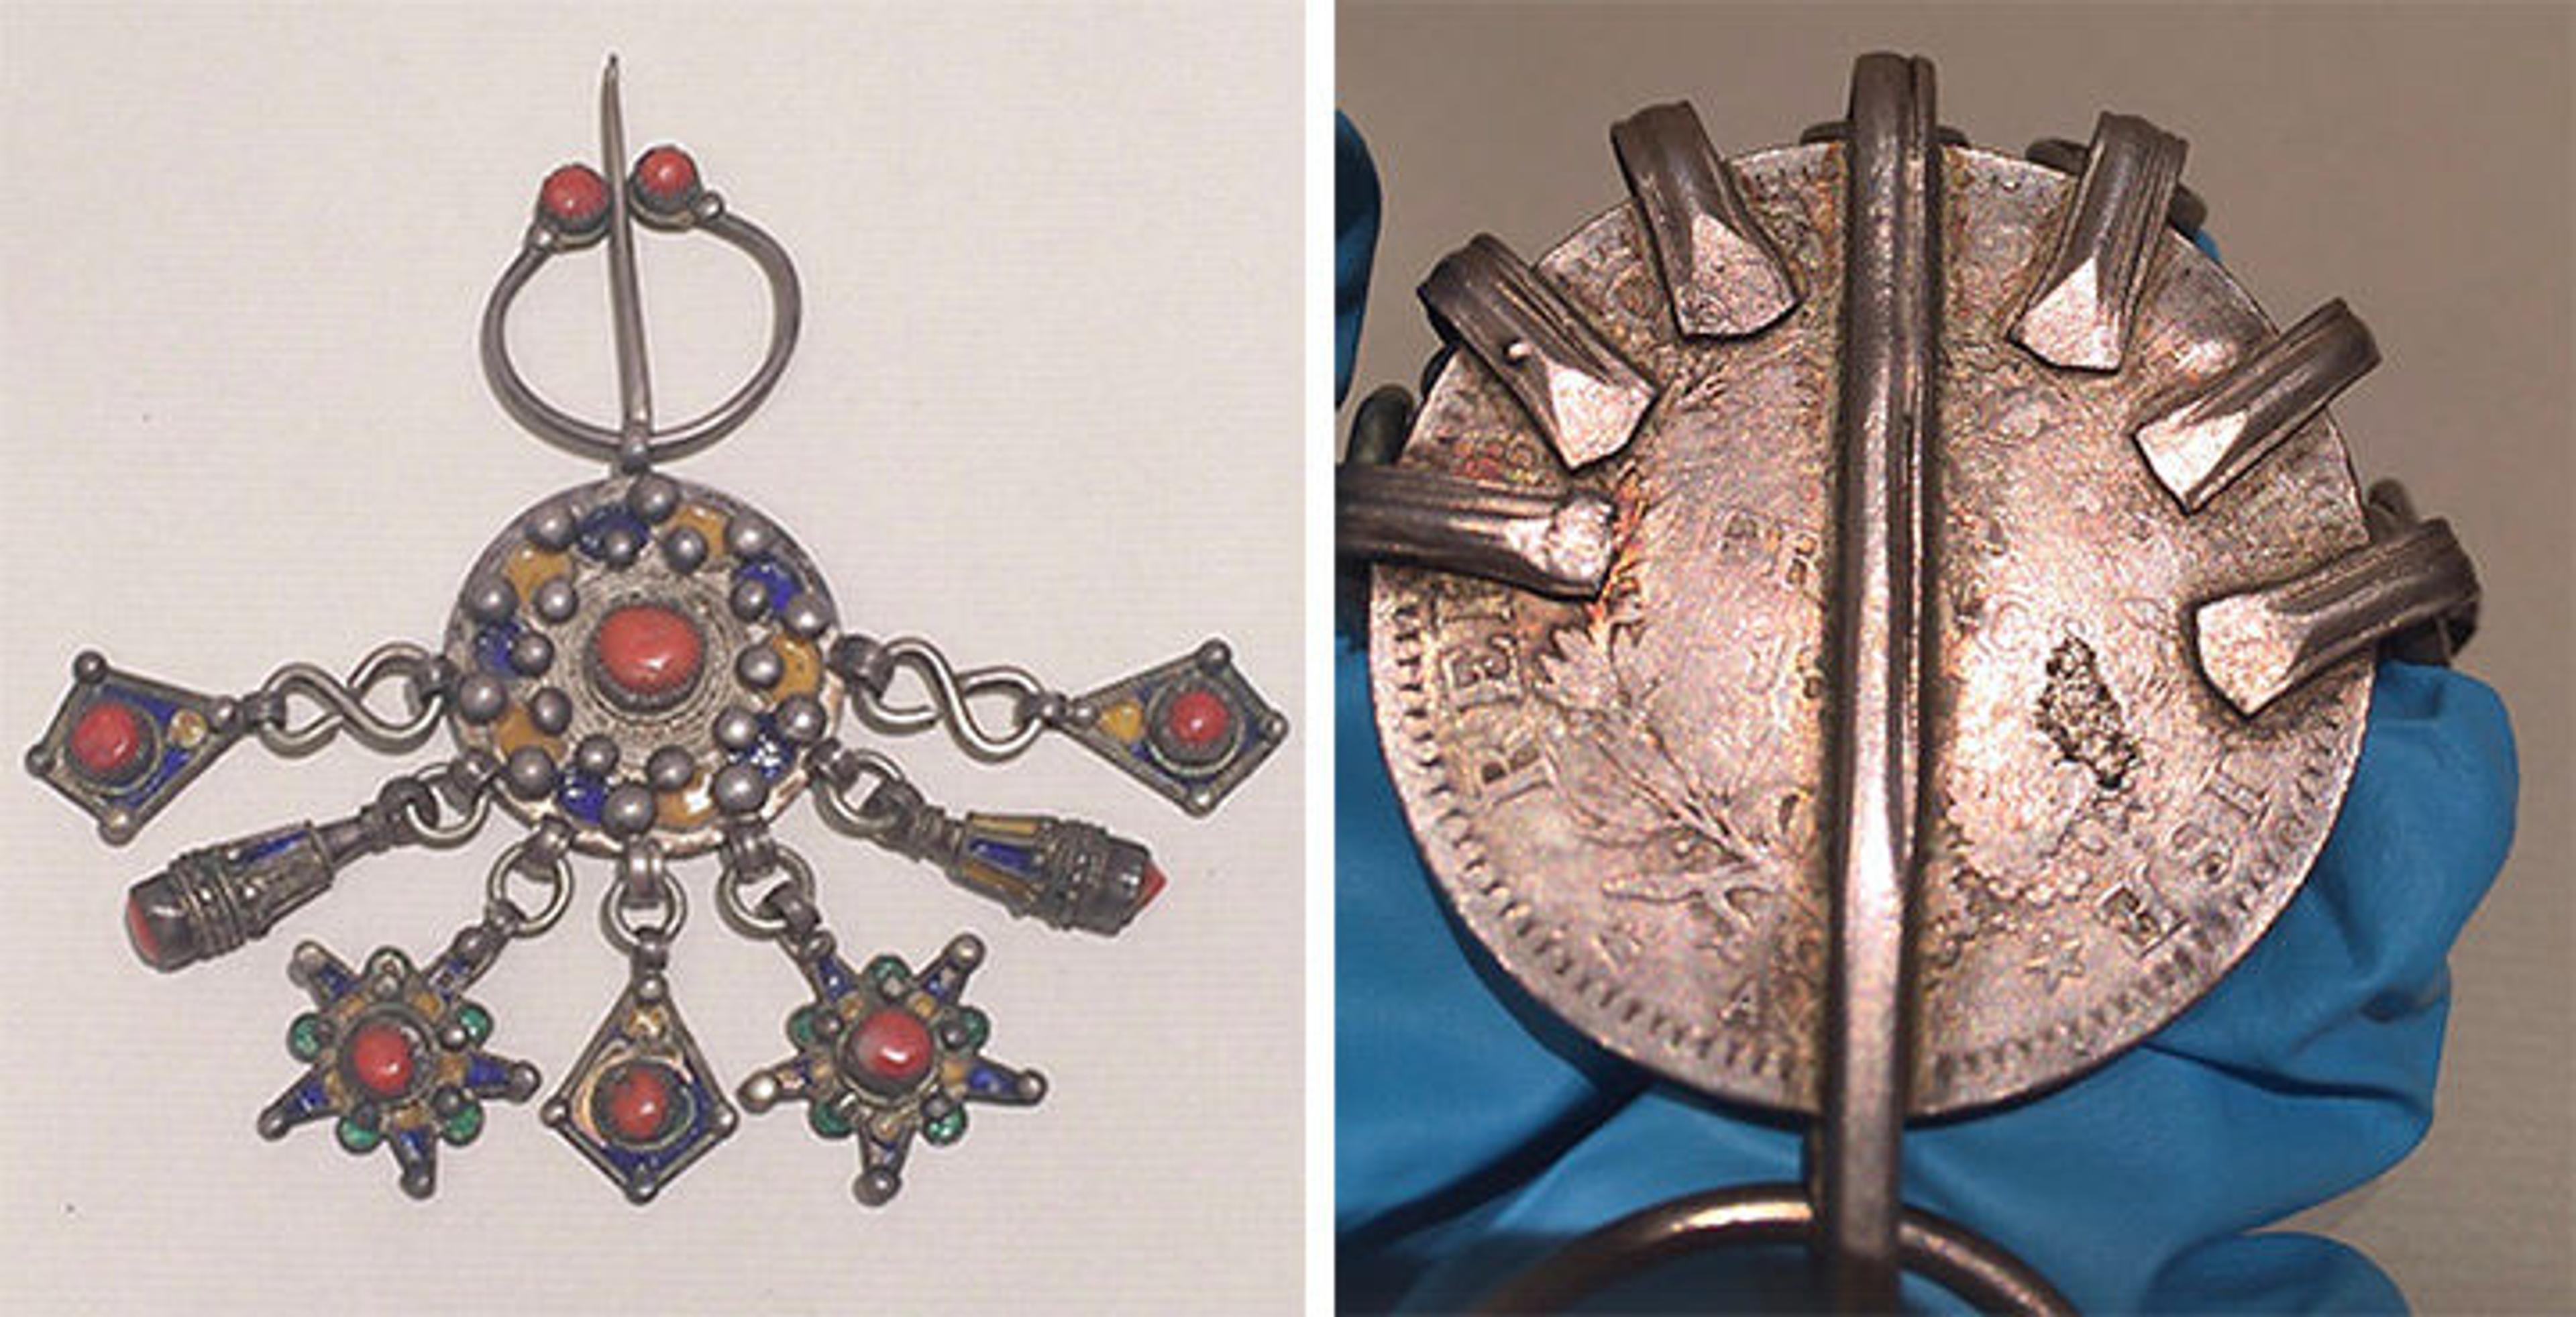 Left: Silver fibulae with enamel and coral. Right: The back is a French coin